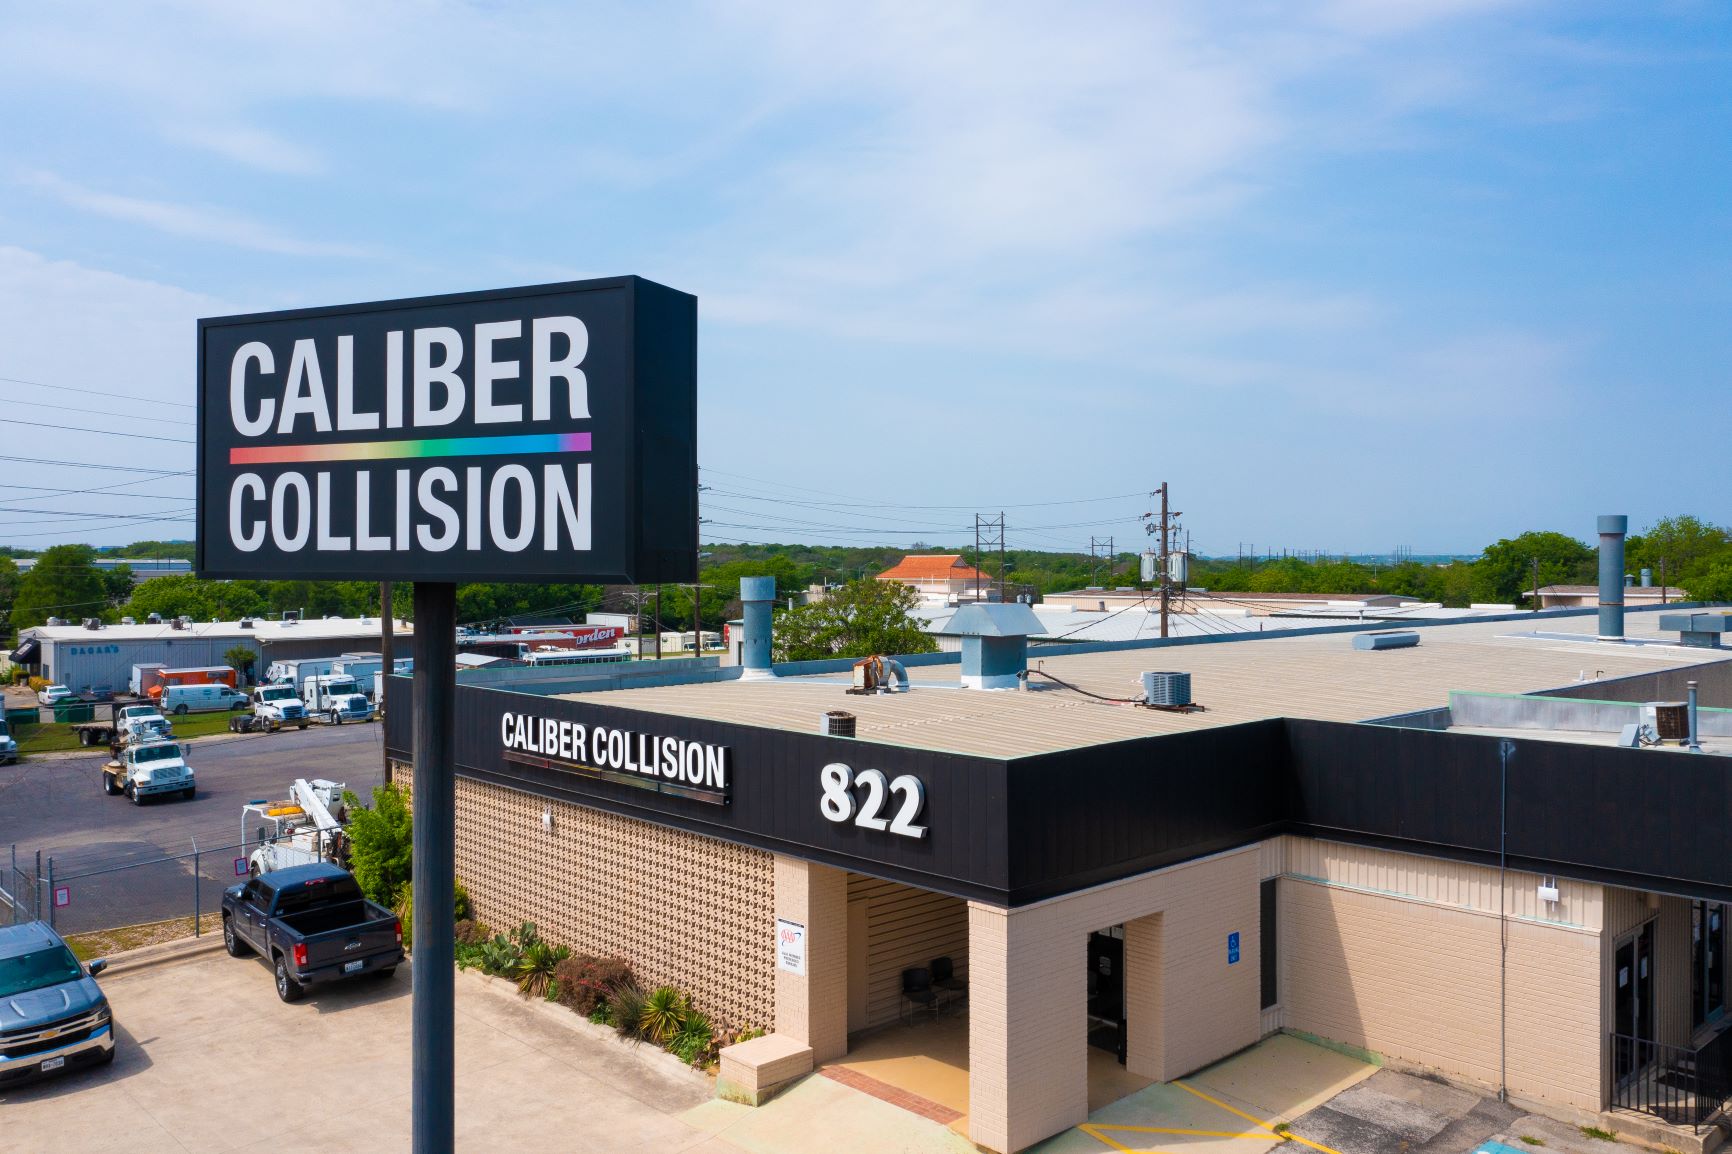 Exterior drone photograph of Caliber Collision building and sign